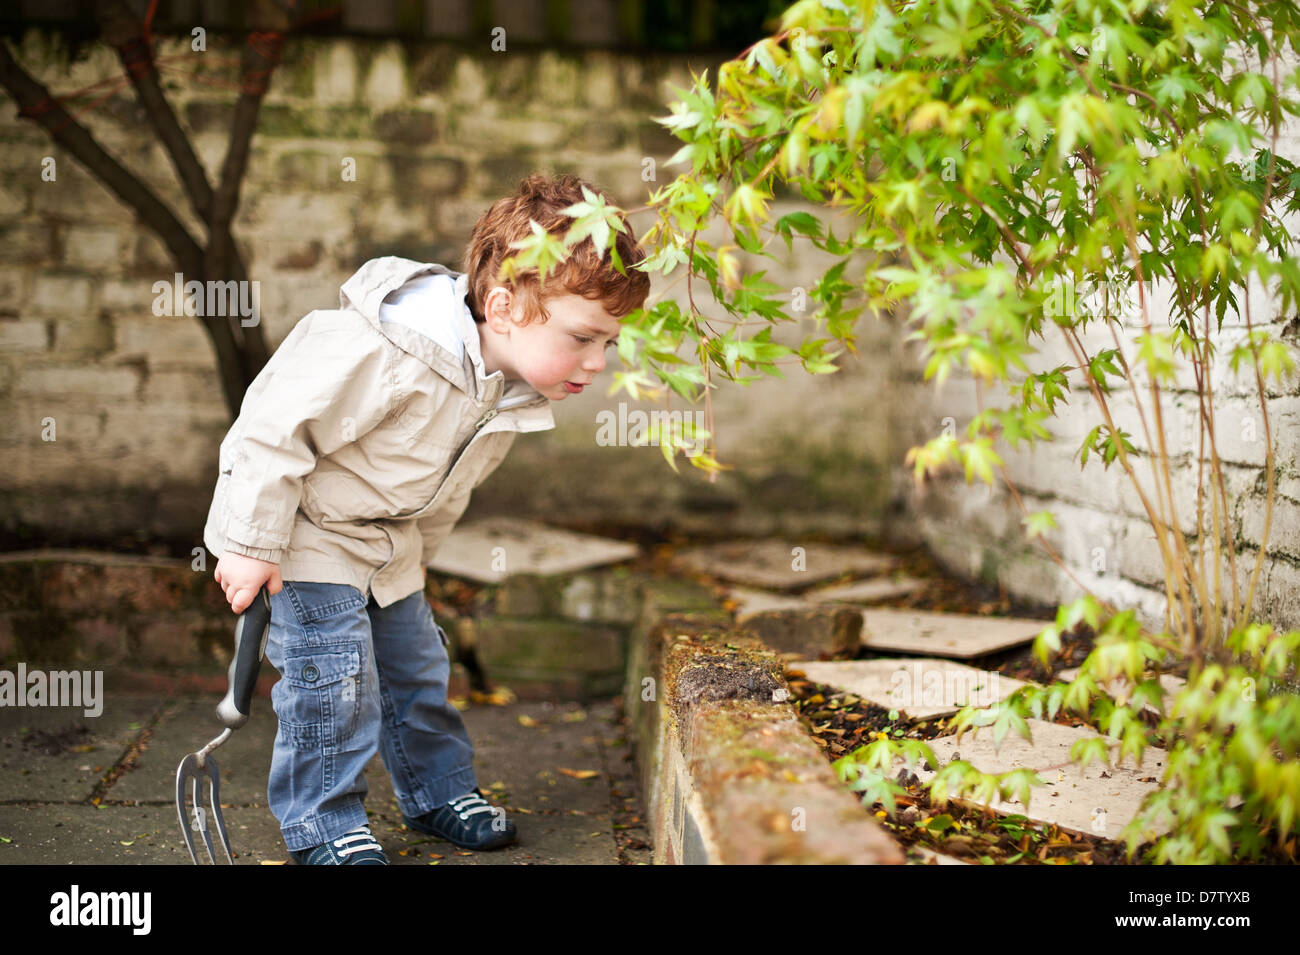 Cute little boy with ginger hair digging in the garden Stock Photo